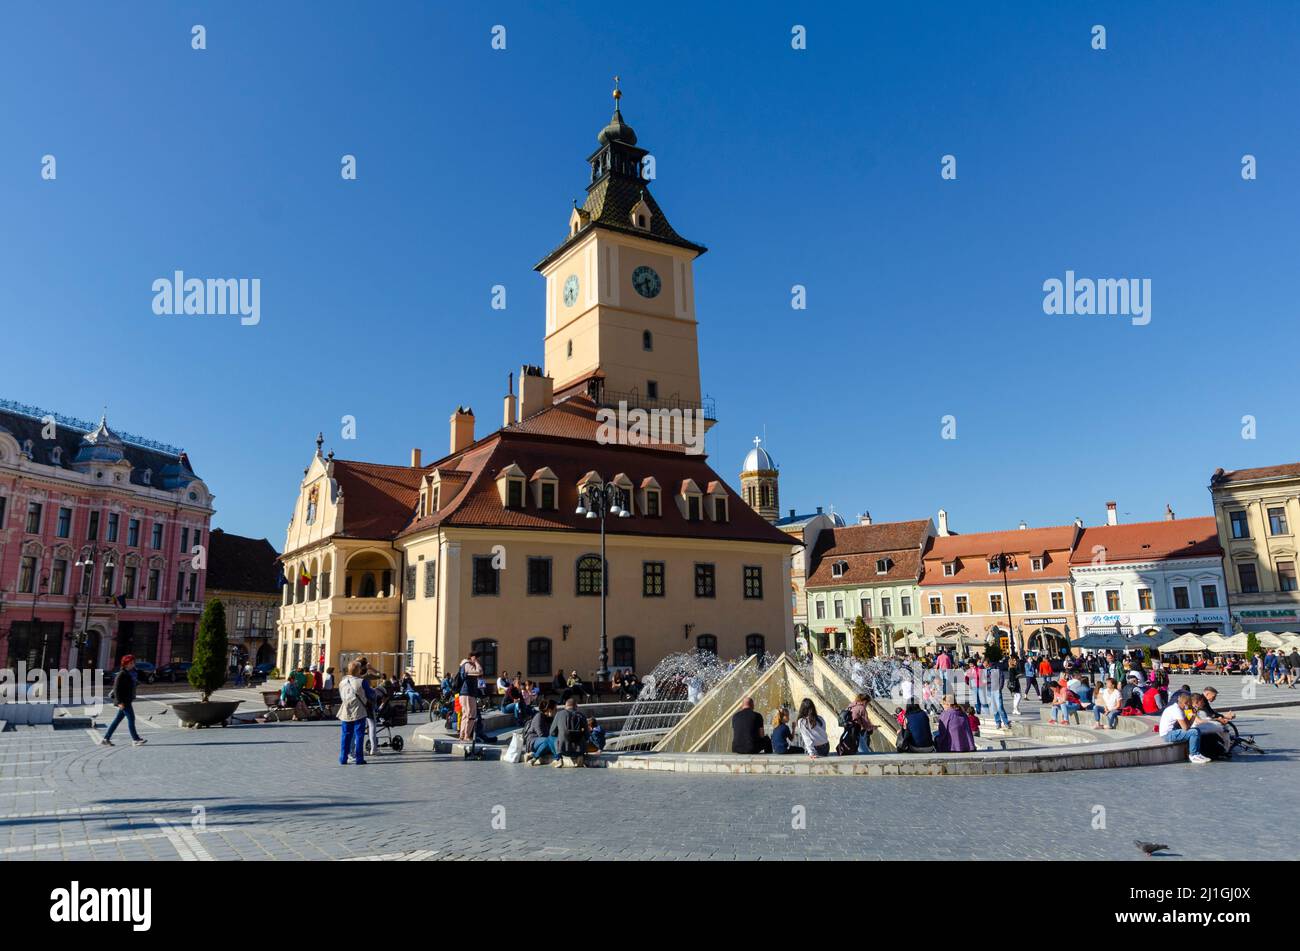 General view of The Council Square in the Historic Center of Brasov, Romania. The Council House dominates the centre of the image - Photo: Geopix Stock Photo